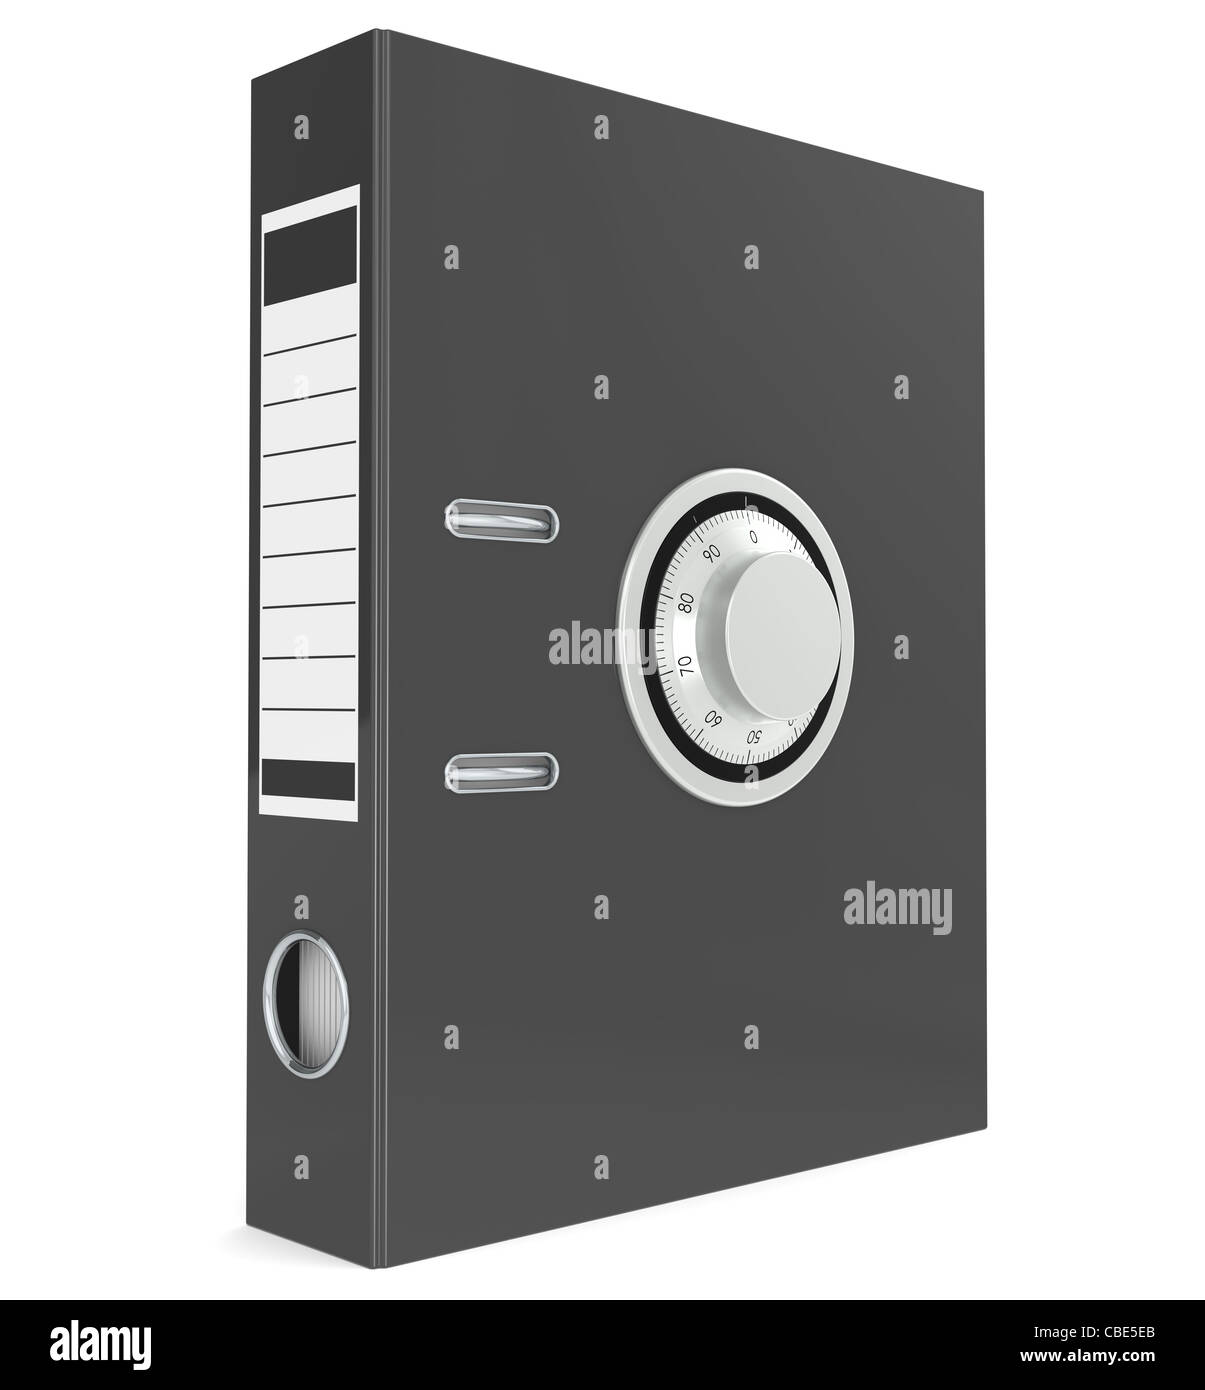 Binder with a Combination Lock. Stock Photo